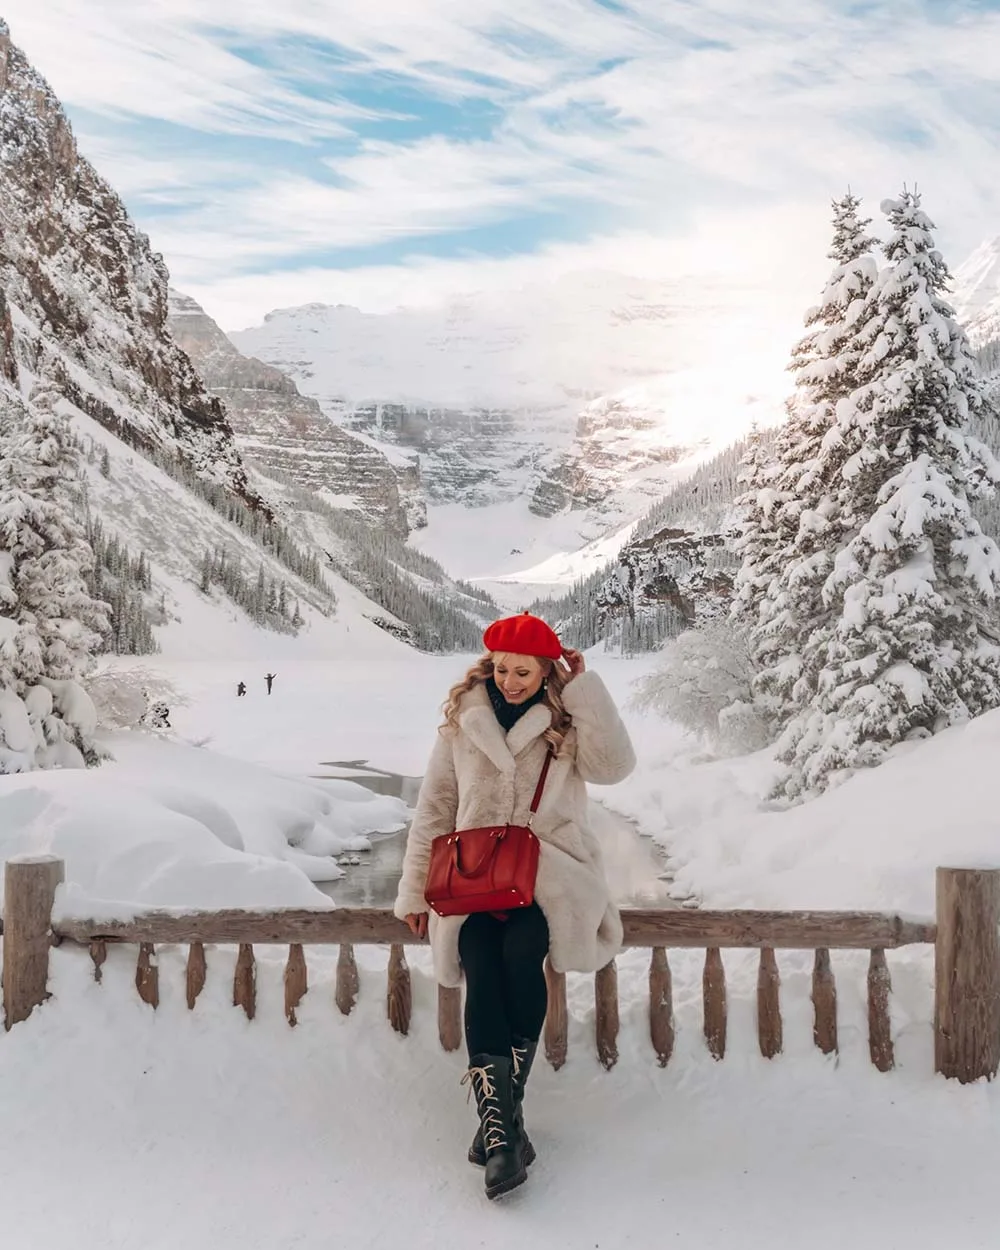 Banff is absolutely incredible. Although most people visit Banff when the weather is warmer, it's absolutely magical to visit in winter. Here's a local's guide to some of the best things to do in in Banff in winter. From hikes and trails to winter sports, family friendly excursions, dining experiences and more. You won't want to miss this guide that will surely convince you to add Banff in winter to your travel bucket list. Pictured here: Visit Lake Louise